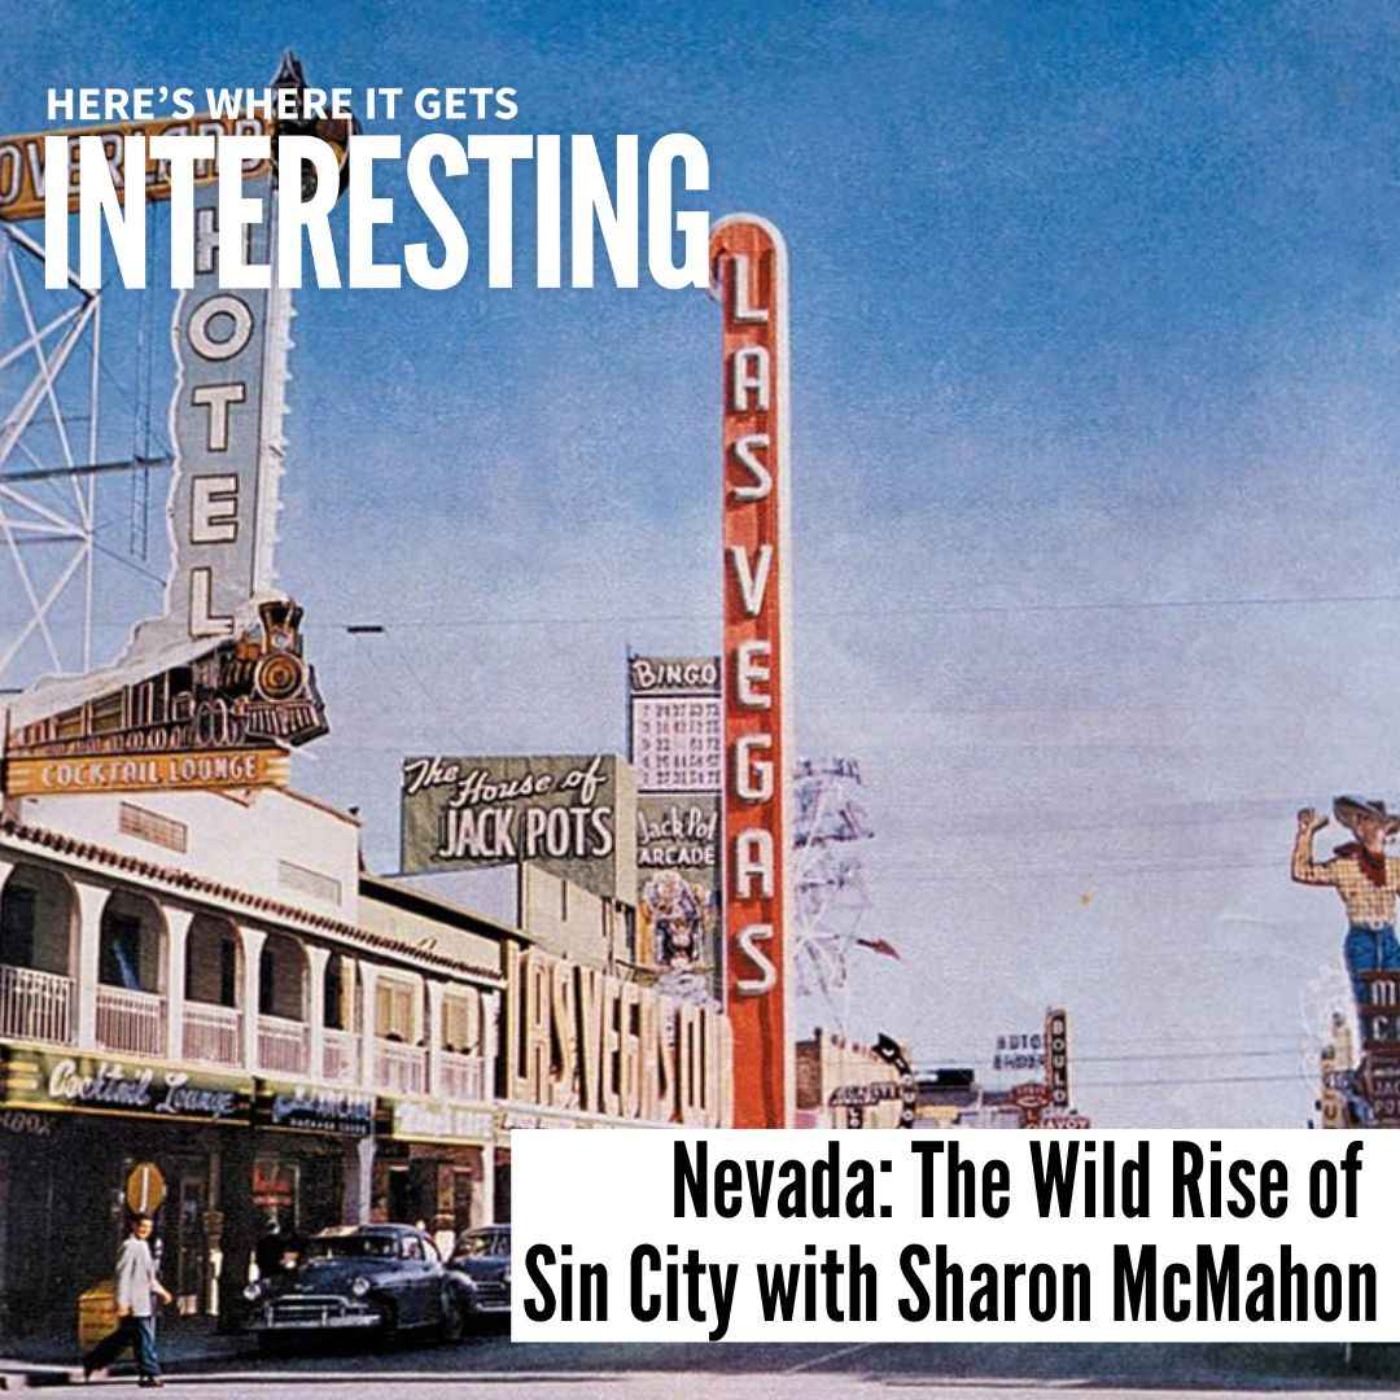 Nevada: The Wild Rise of Sin City with Sharon McMahon